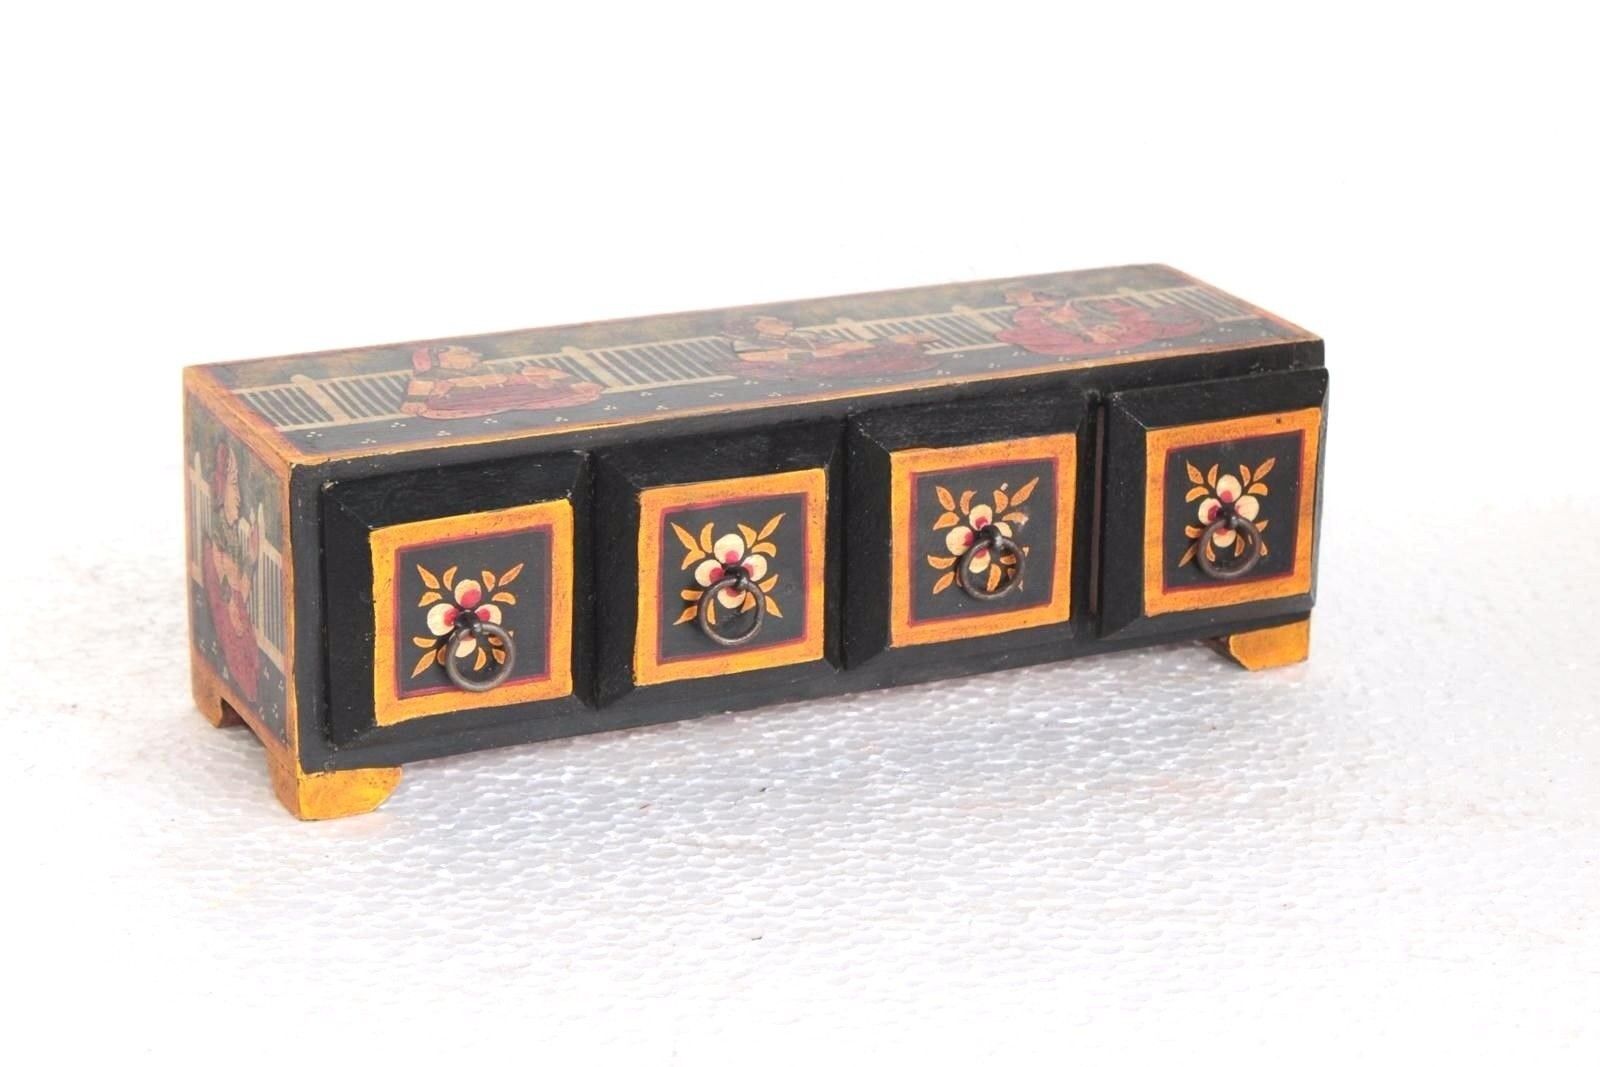 New 4 Drawer Chest Handpainted Wood Handicrafts Collectible Christmas Gifts W-6